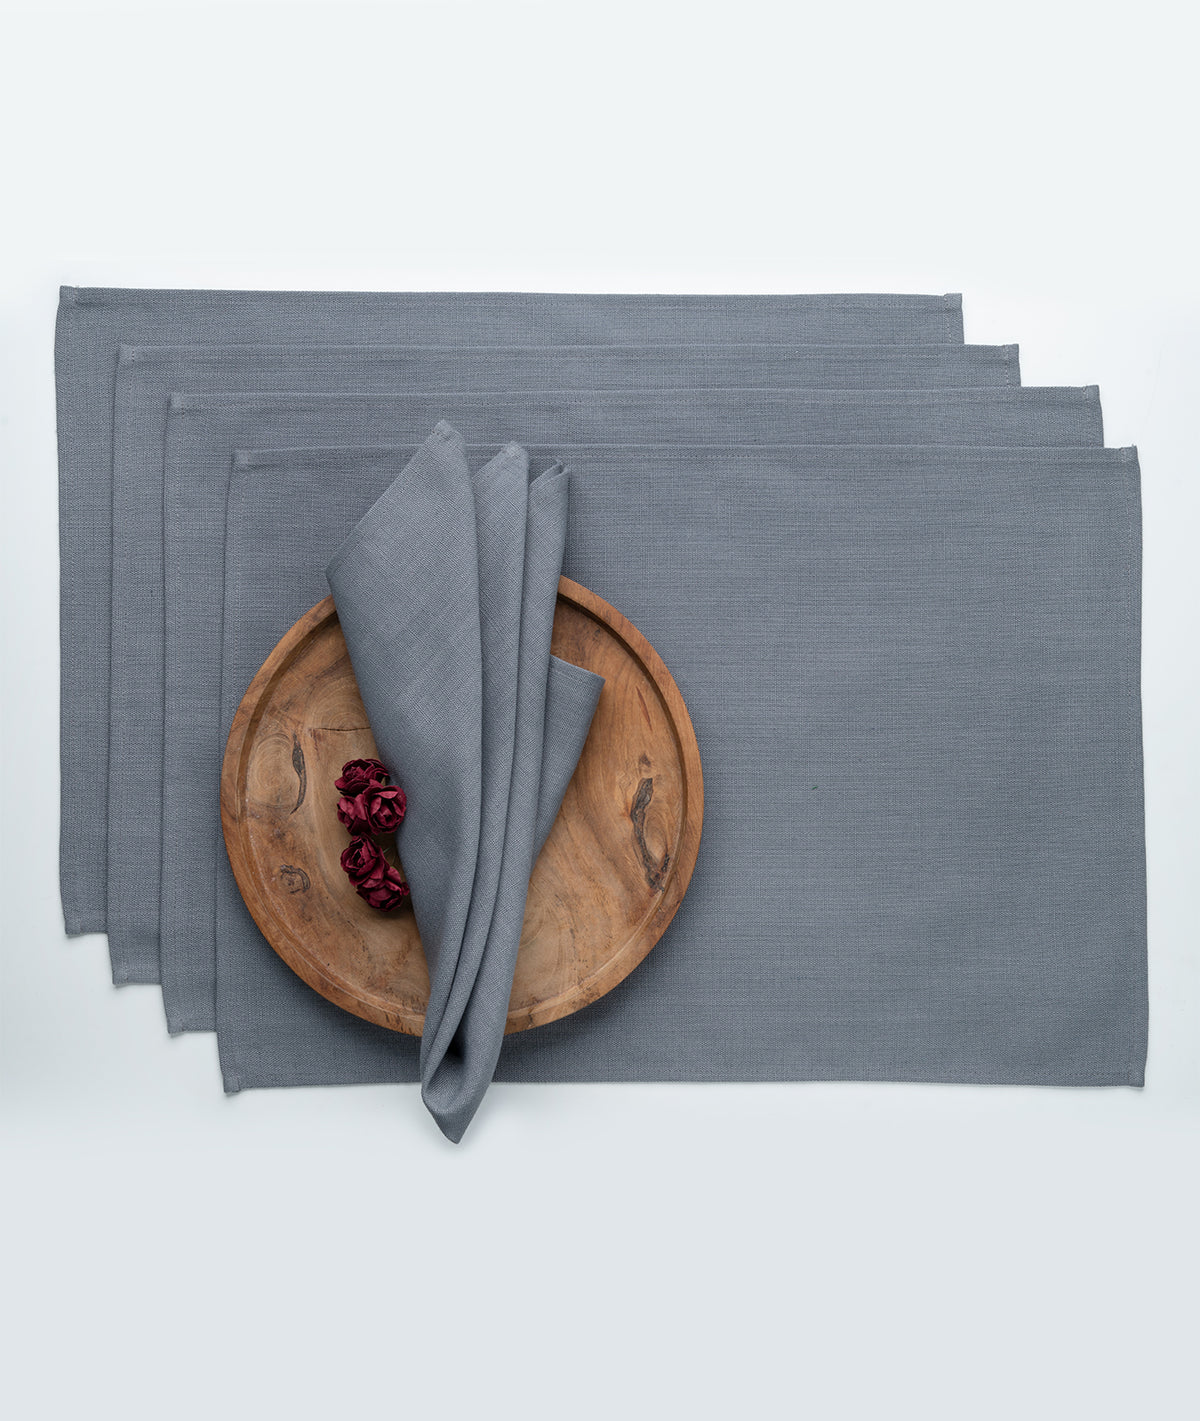 Charcoal Grey Linen Textured Placemats 13 x 18 Inch Set of 4 - Plain